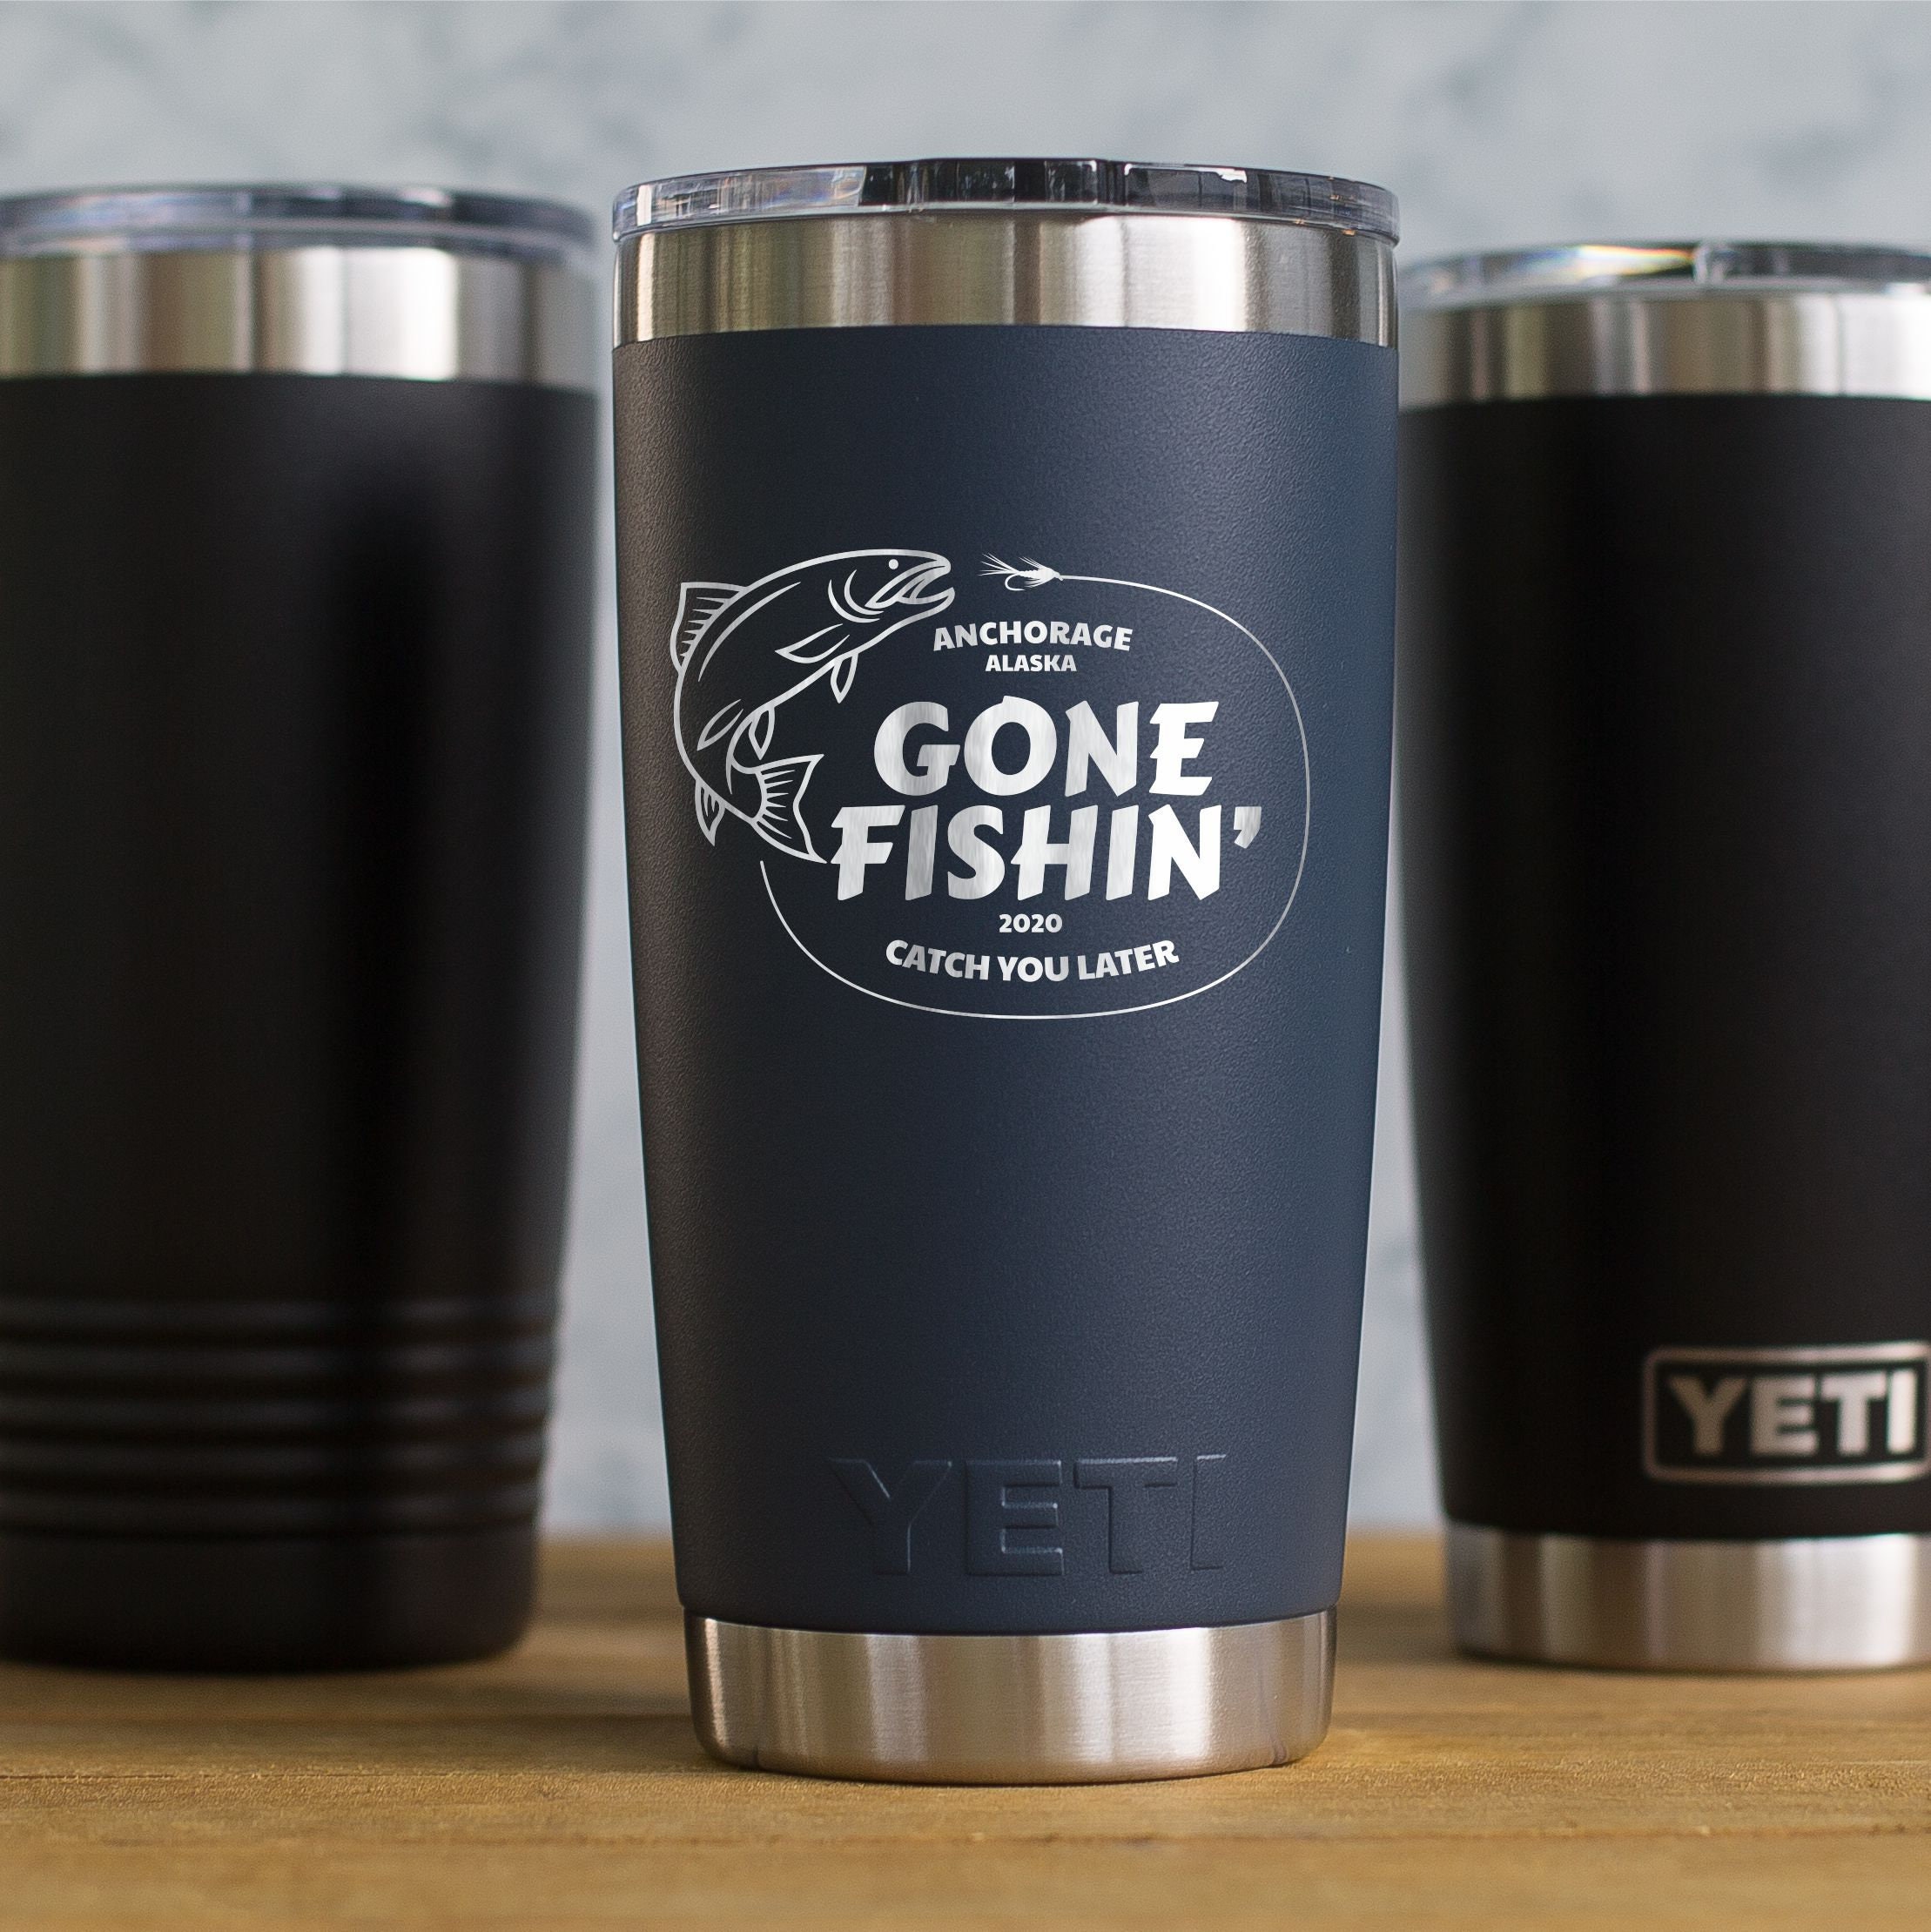 Introducing YETI's New & Improved Insulated Cup - Fly Fisherman